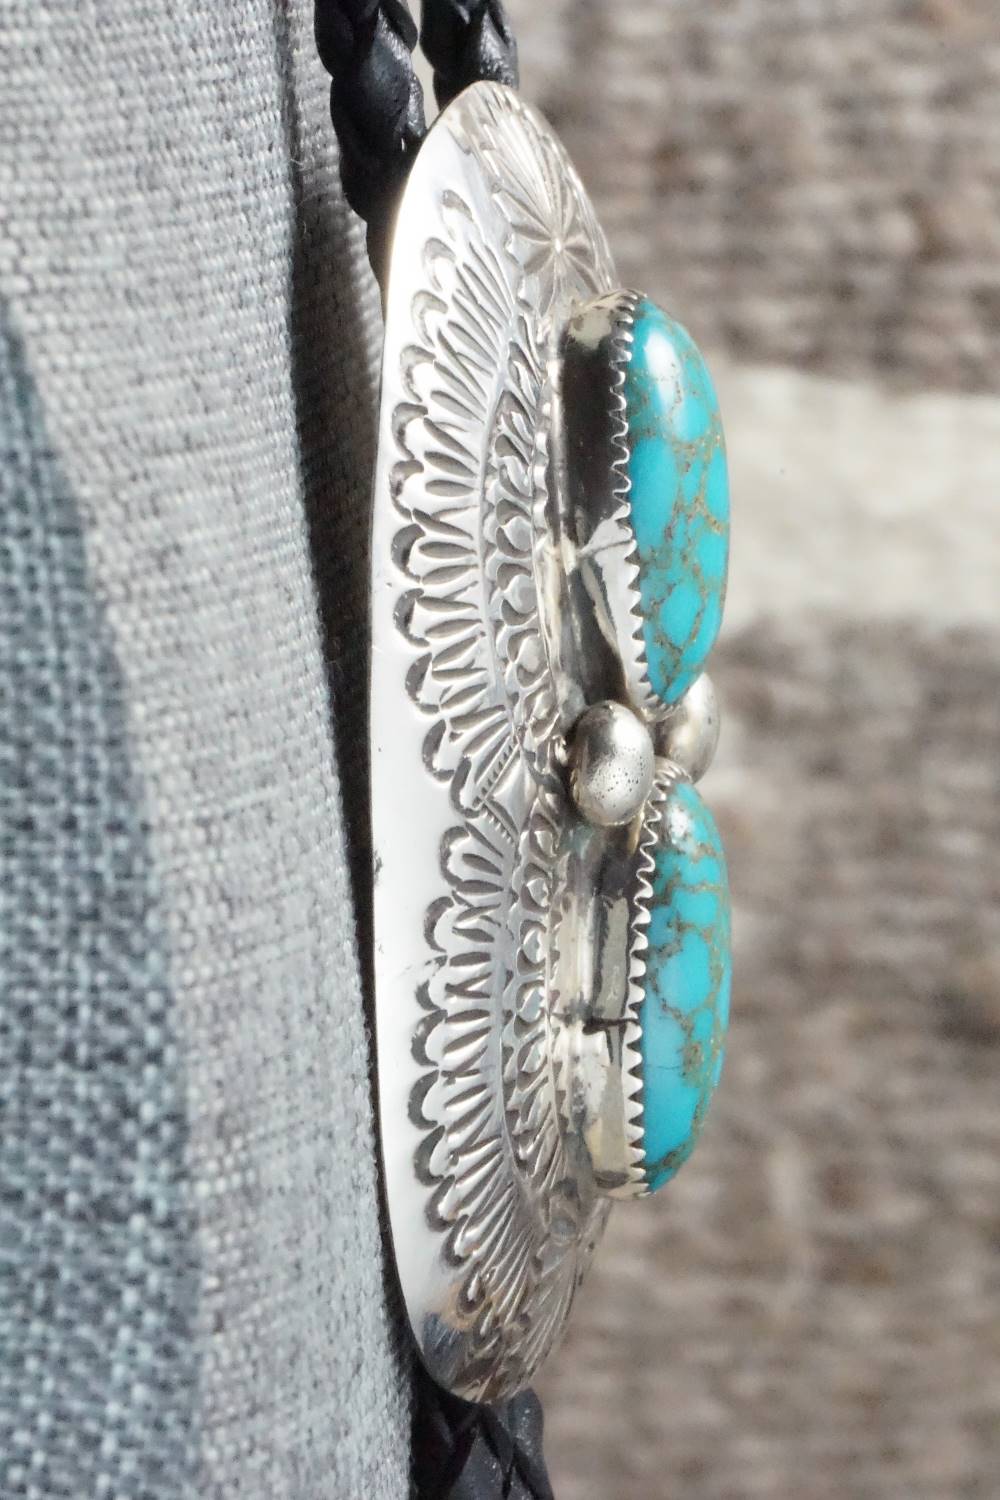 Turquoise & Sterling Silver Bolo Tie - Shirley Skeets